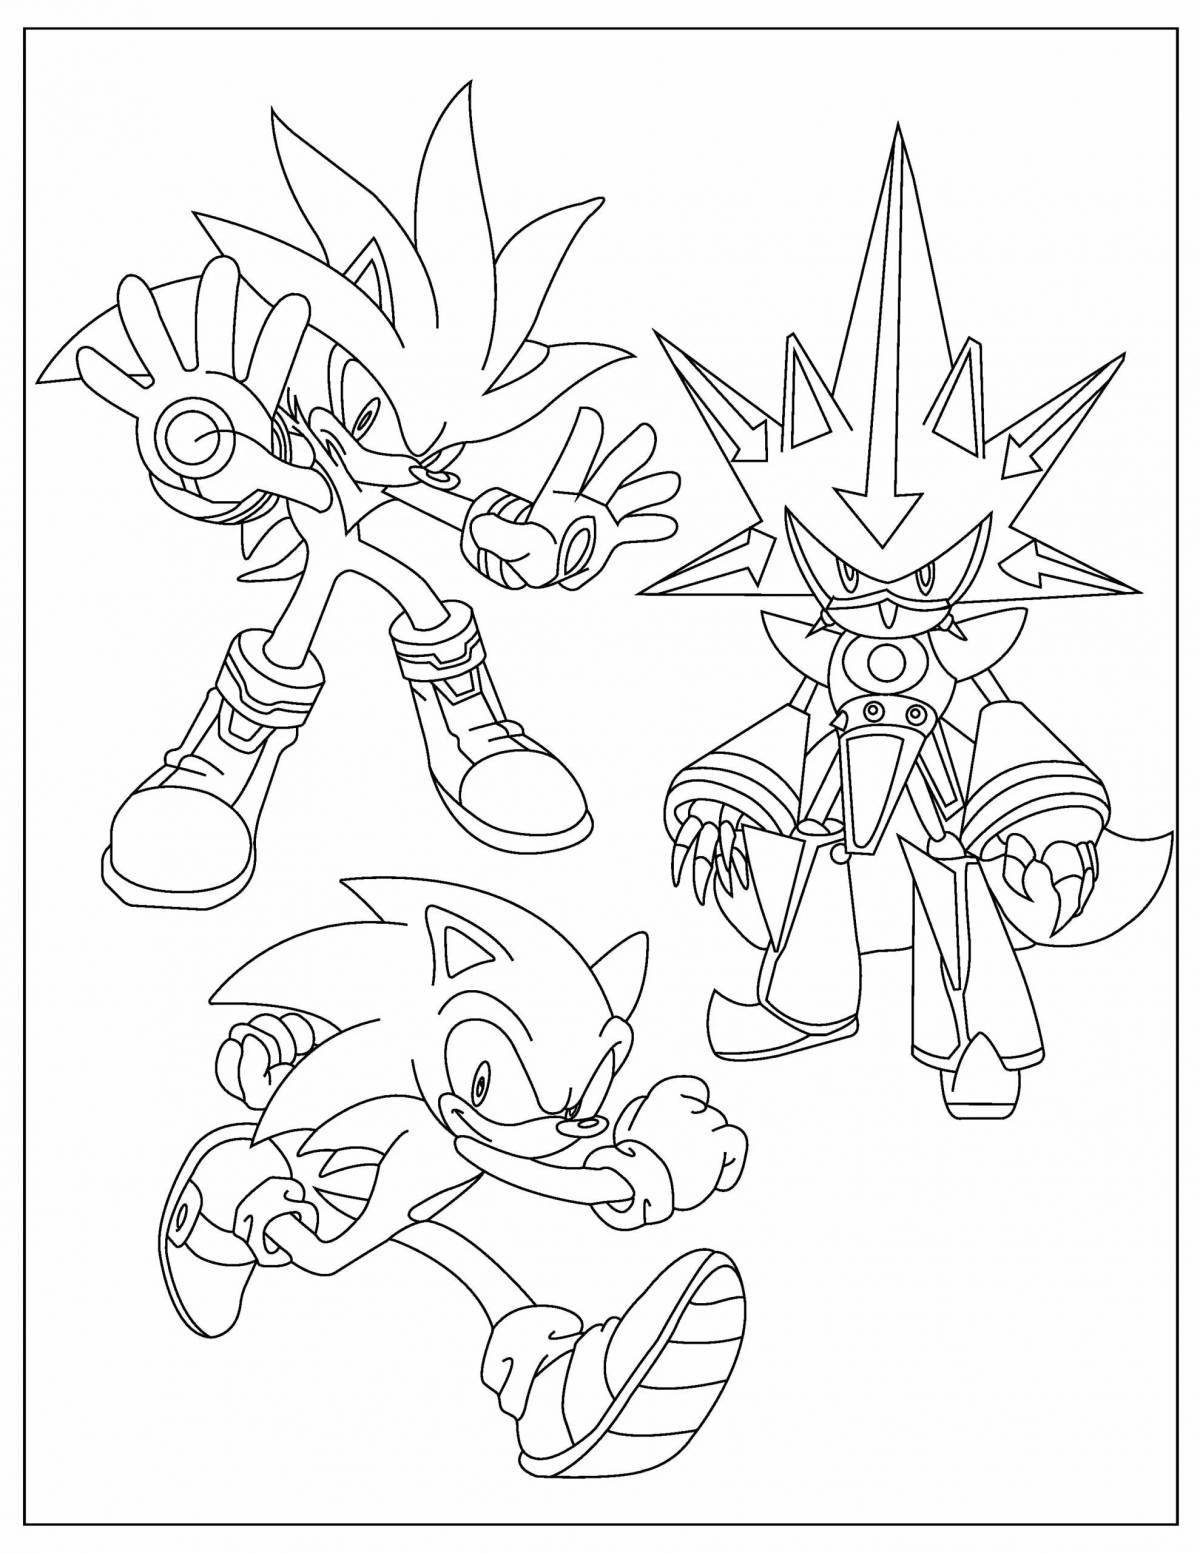 Colorful coloring sonic team